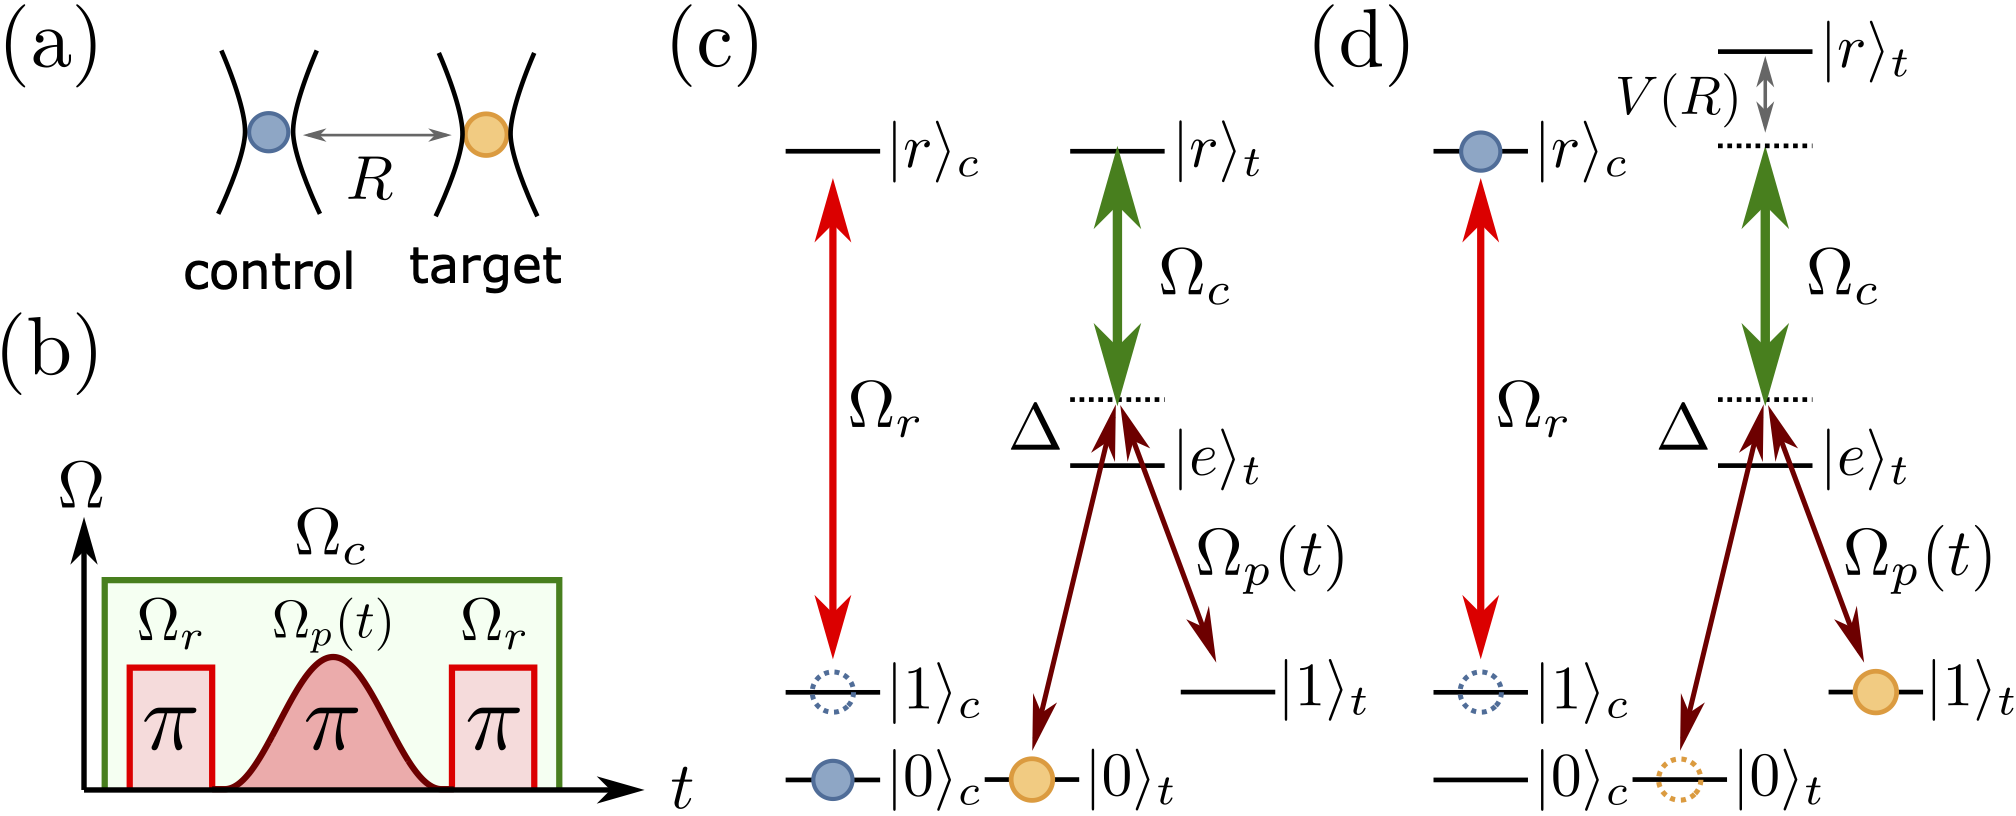 EIT gate protocol (a) Control and target qubits in individual traps (b) Excitation pulse sequence (c) If the control qubit is in state |0&gt;, the EIT condition on the target qubit prevents transfer whilst (d) if the control qubit is in |1&gt; it is Rydberg excited, with interactions breaking the EIT condition and the target undergoes a Raman transition to implement a native CNOT gate.